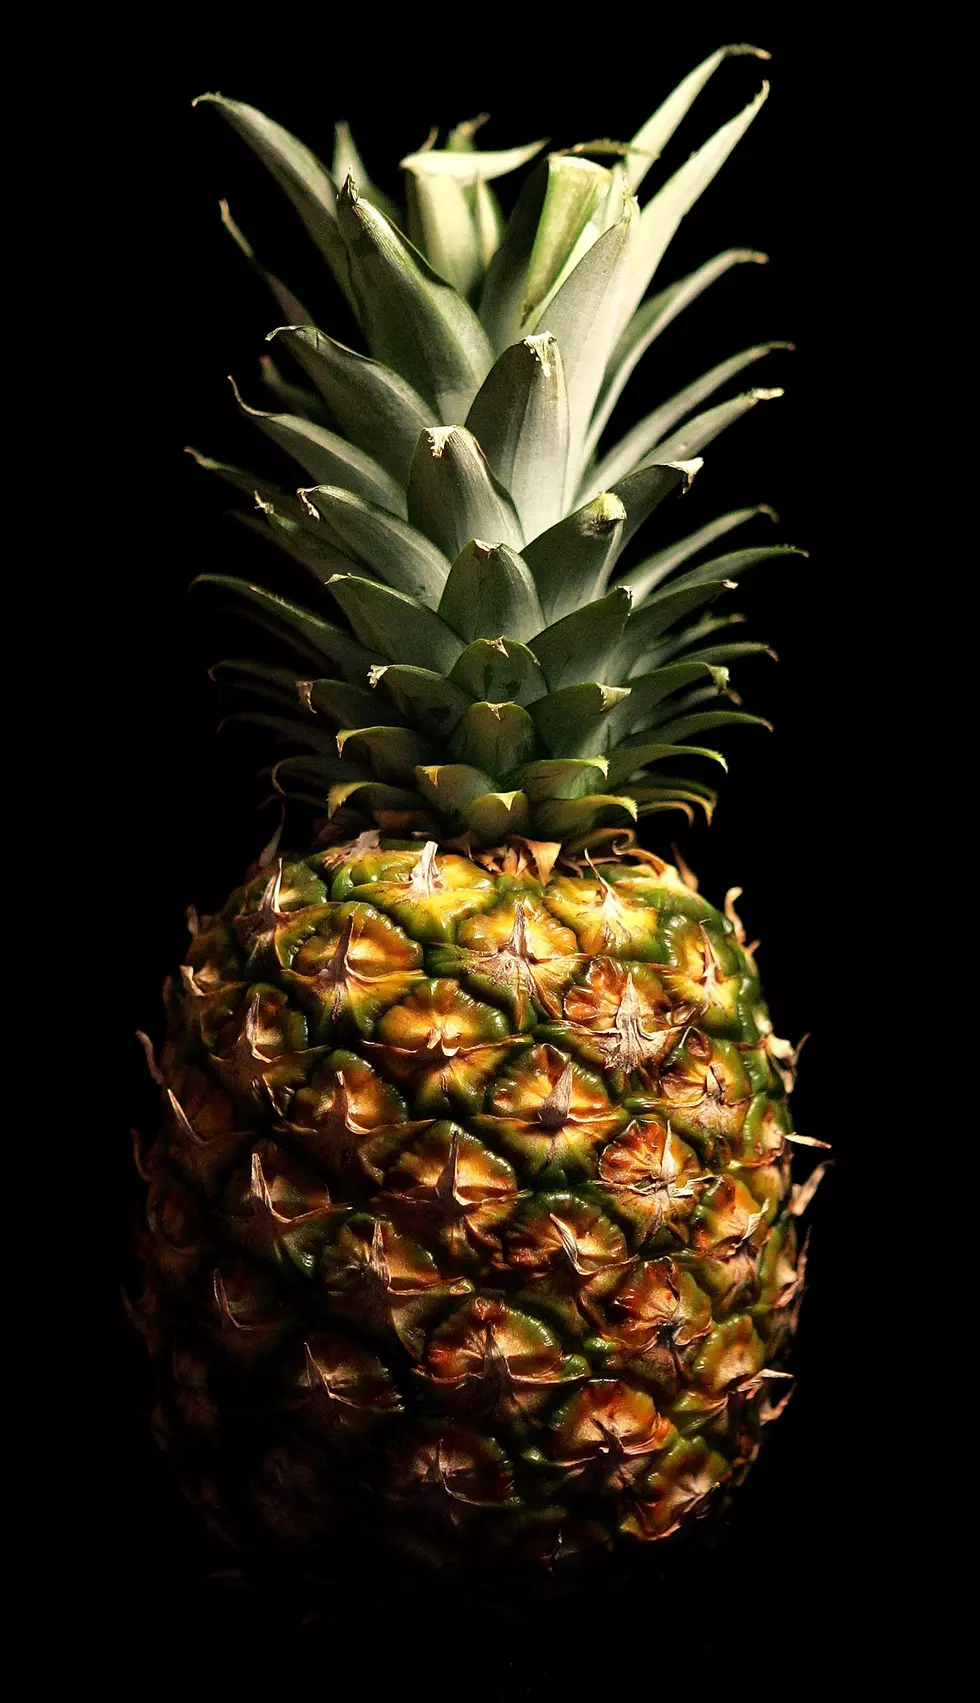 Amazing Video Of How To Cut A Pineapple